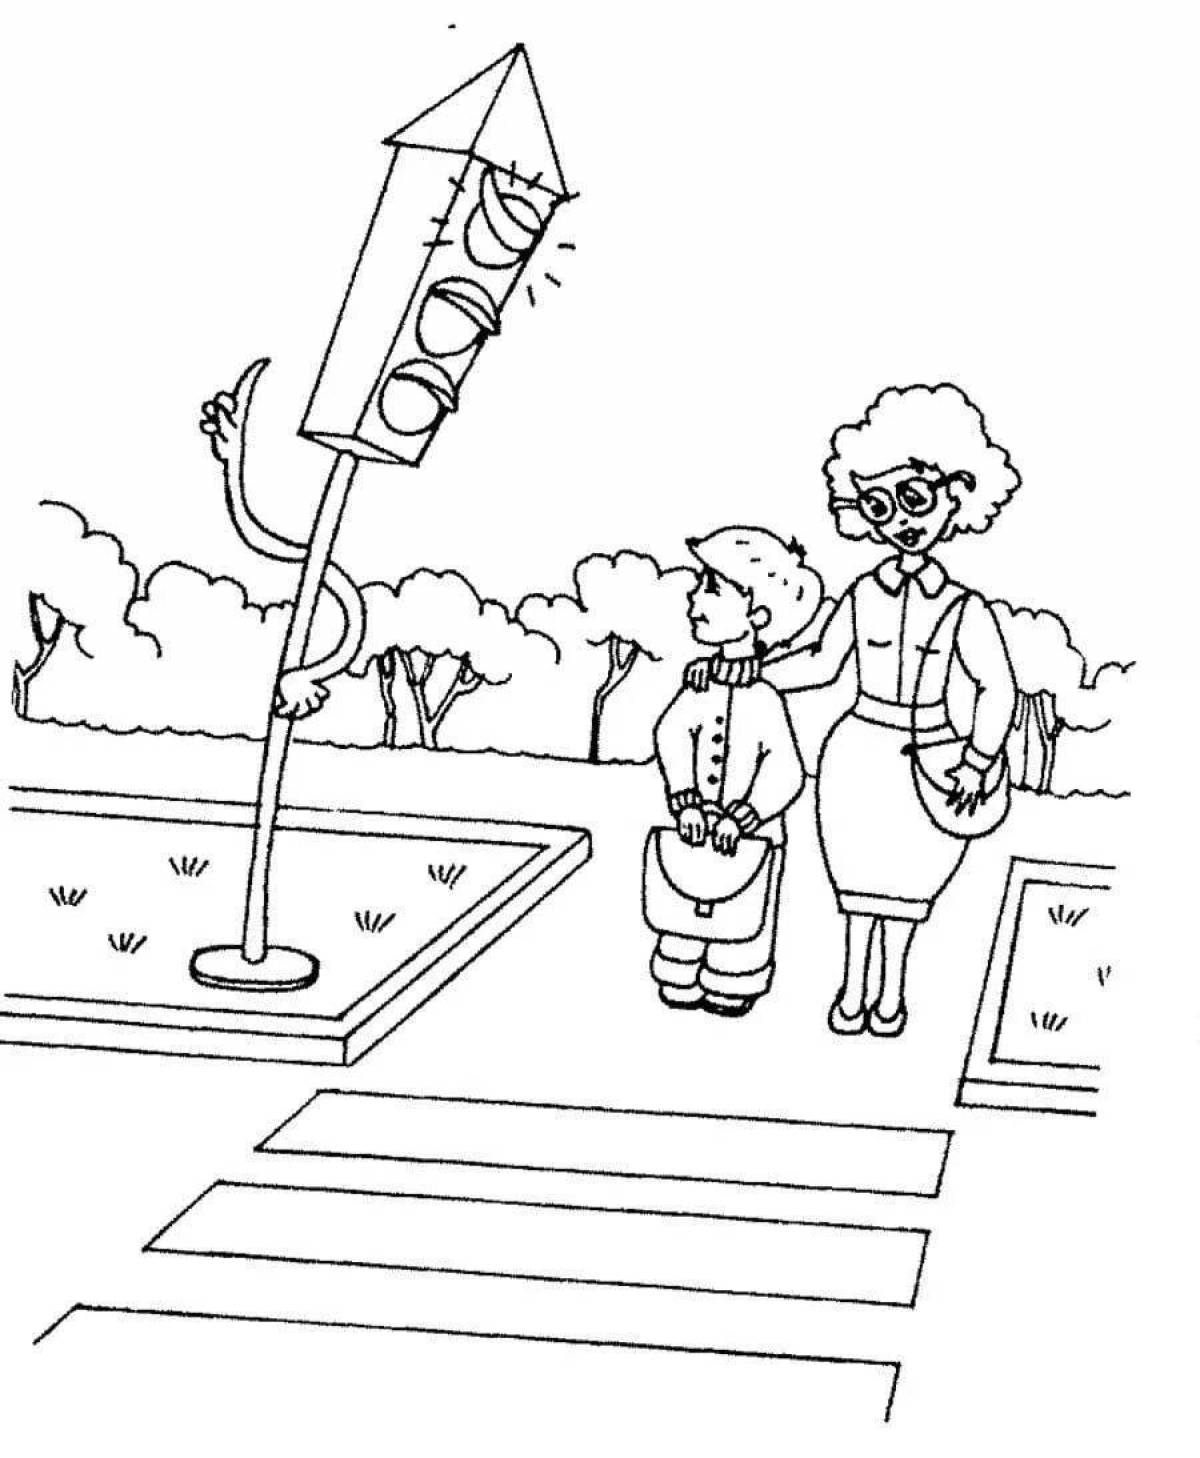 Clear the coloring page for the rules of the road in kindergarten